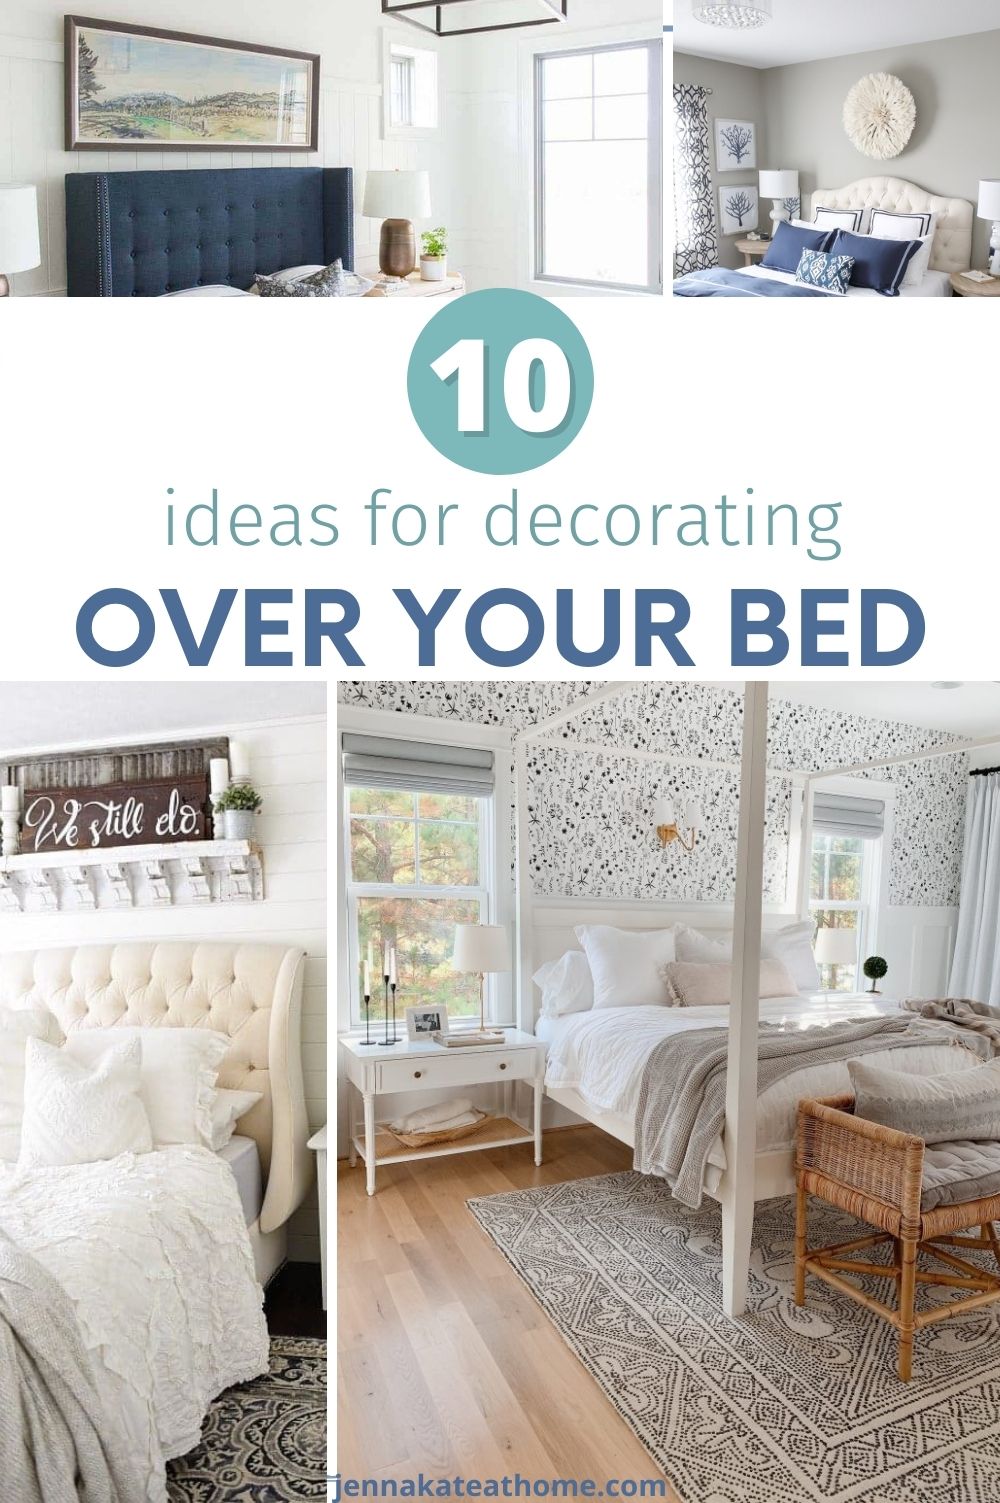 decorating ideas for over bed pin image